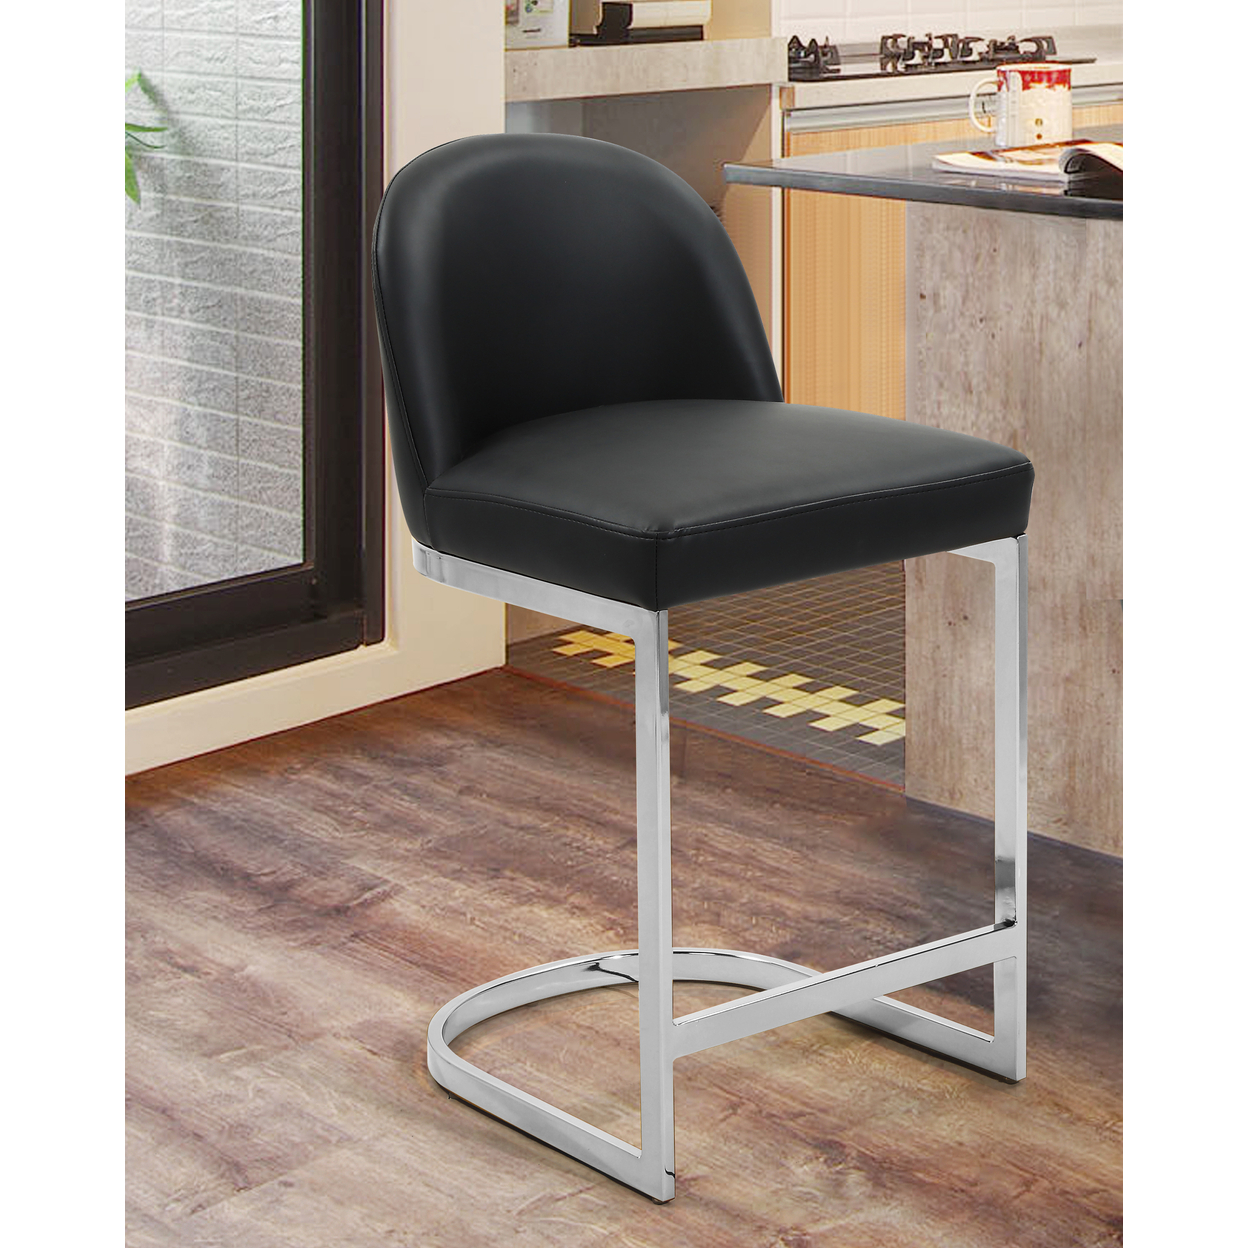 Iconic Home Liana Counter Stool Chair PU Leather Upholstered Armless Design Half-Moon Chrome Plated Solid Metal U-Shaped Base - Black